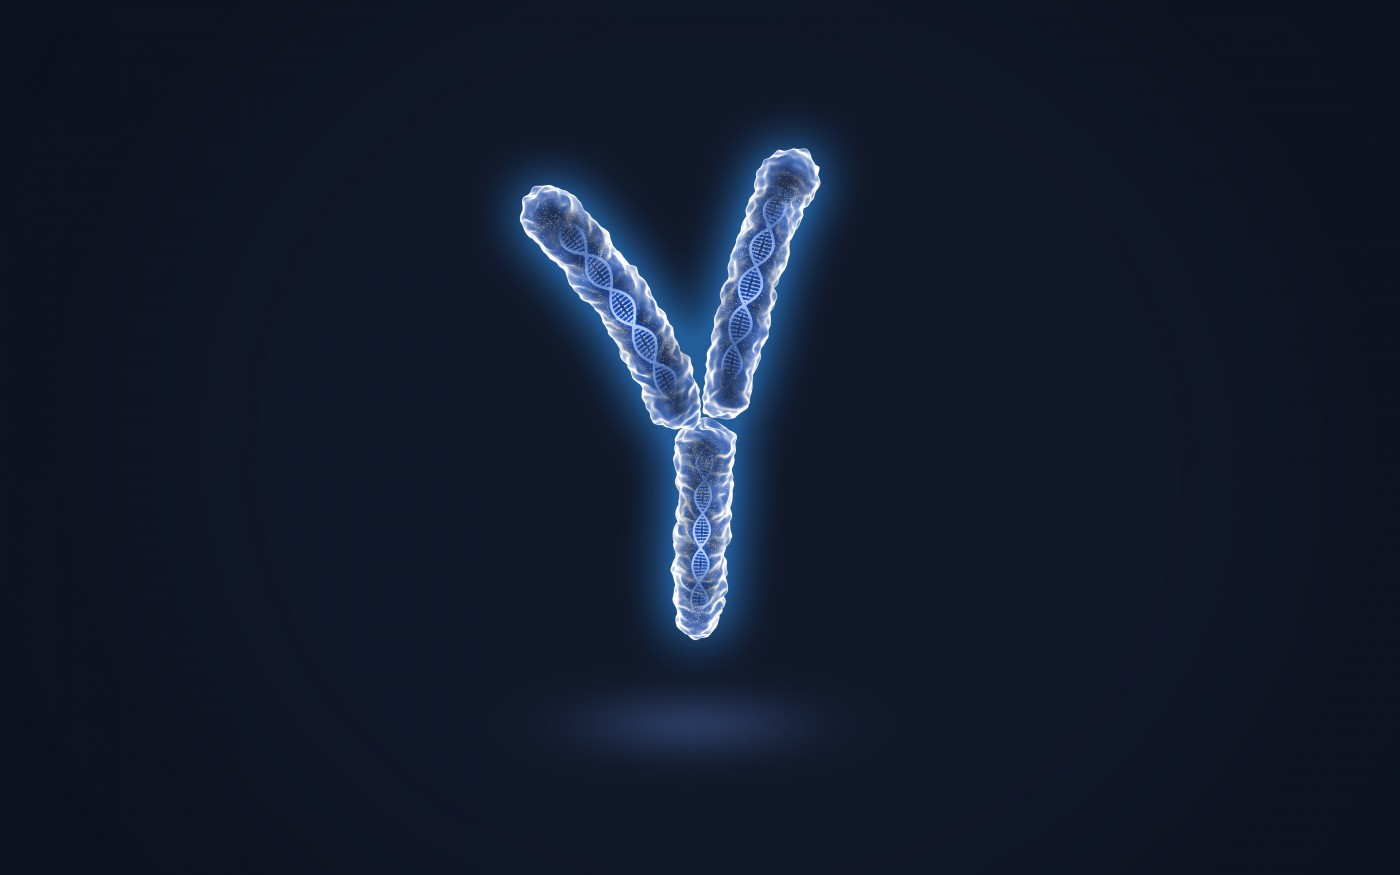 Partial loss of the Y chromosome increases the risk for Alzheimer’s.